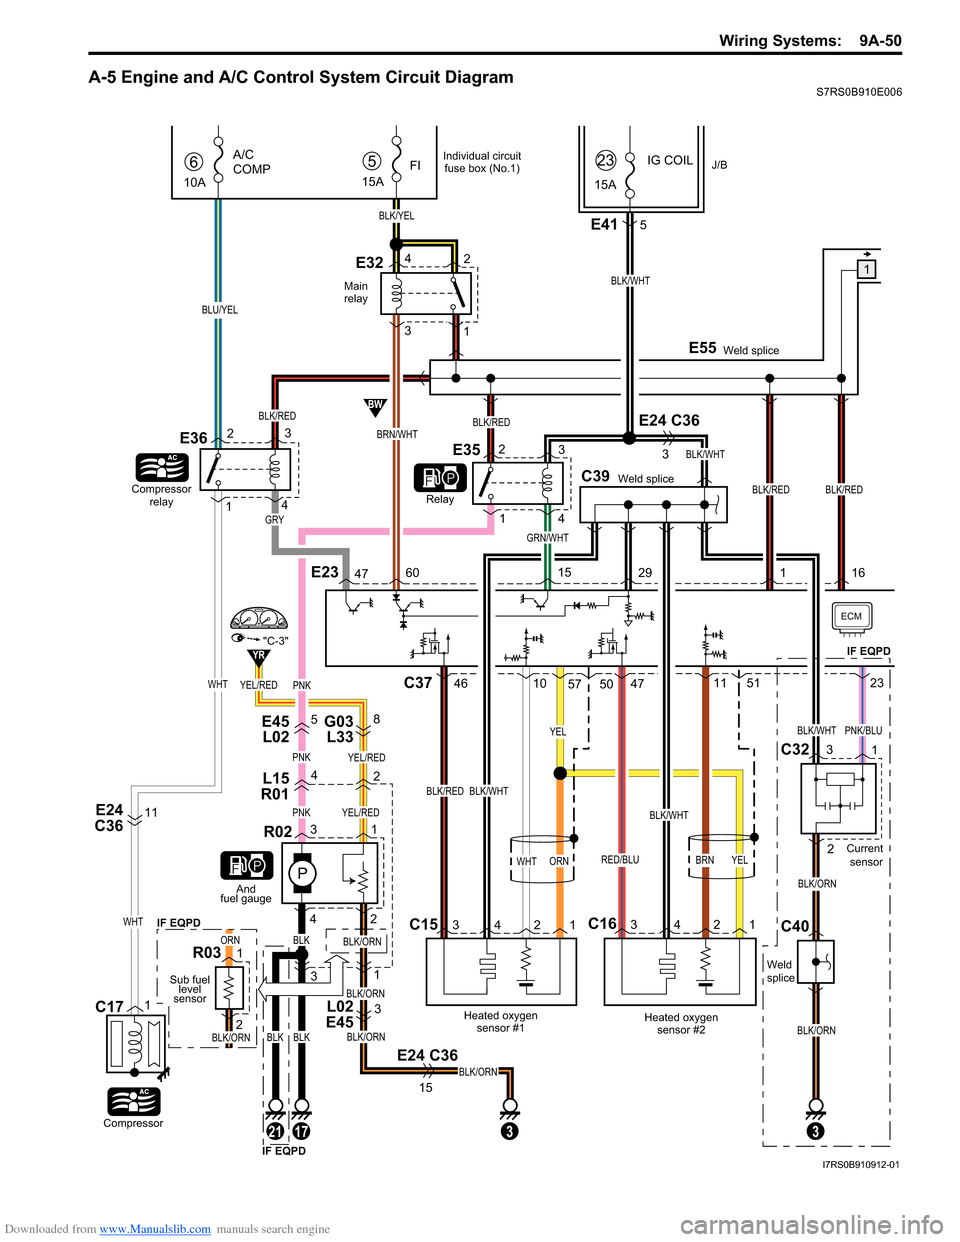 SUZUKI SWIFT 2007 2.G Service Workshop Manual Downloaded from www.Manualslib.com manuals search engine Wiring Systems:  9A-50
A-5 Engine and A/C Control System Circuit DiagramS7RS0B910E006
YEL/RED
E45L02 G03 
L33
L02 
E4558
L15
R0142
PNKYEL/RED
P